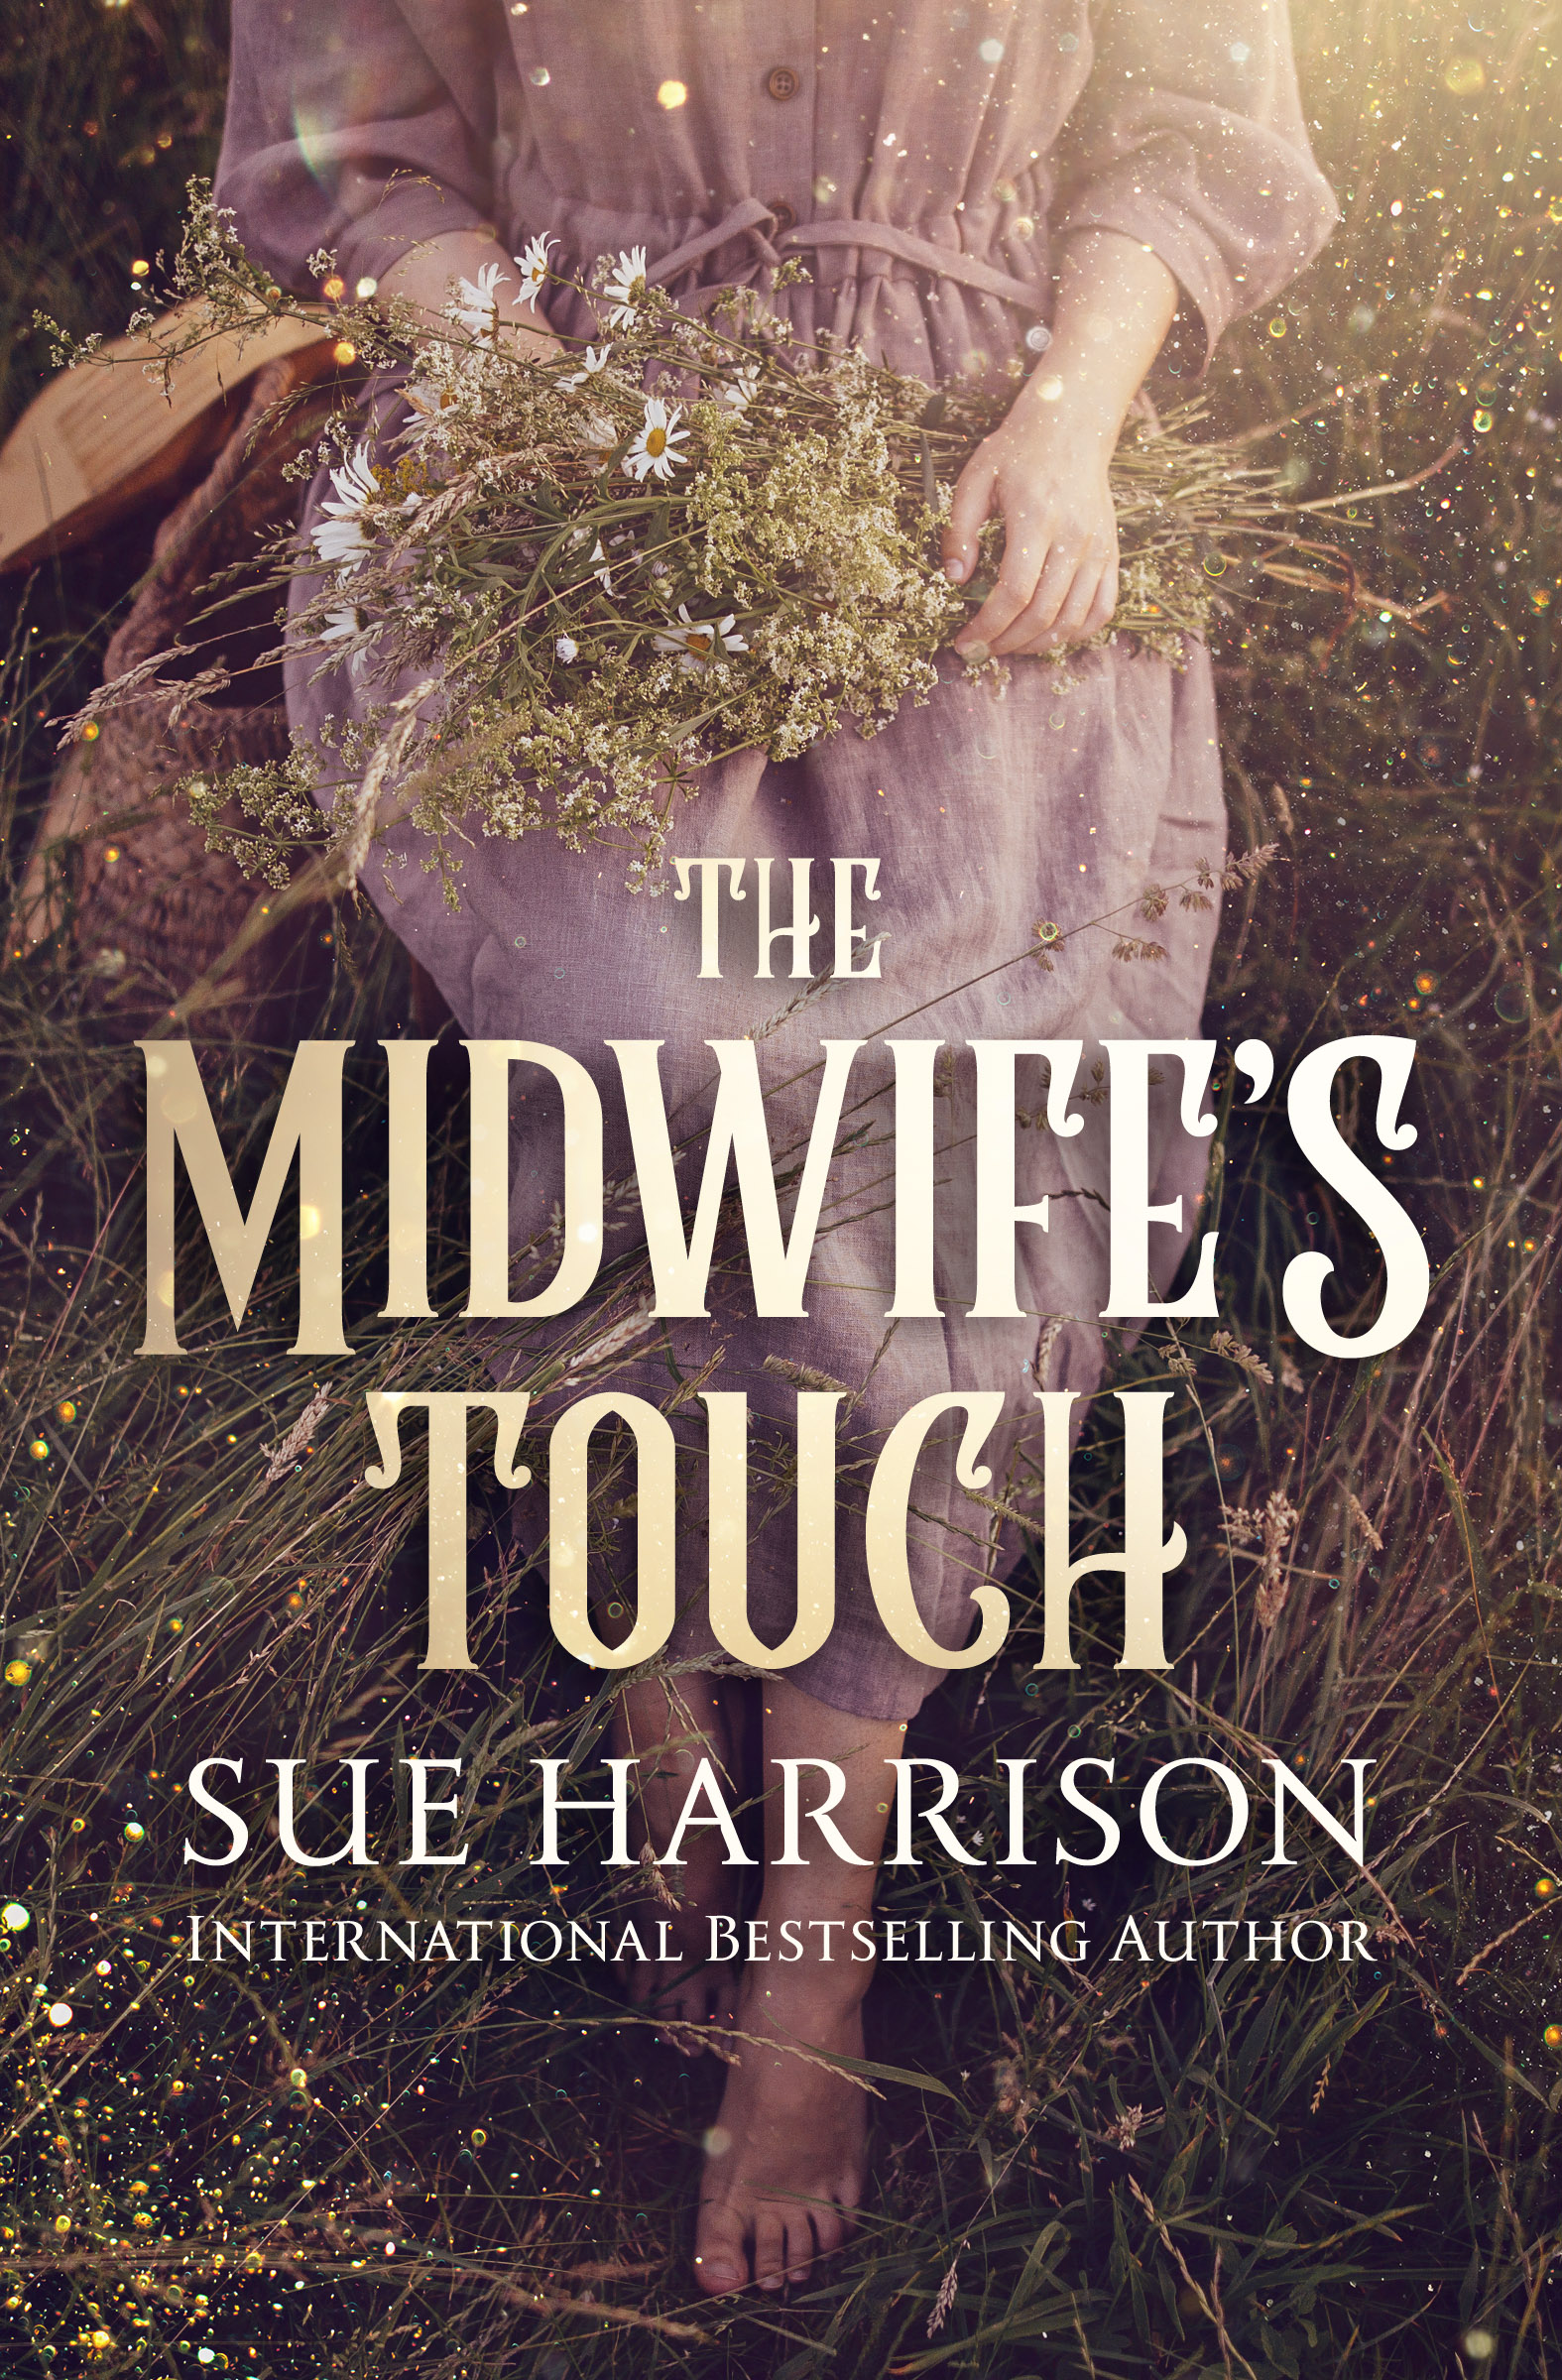 Sue Harrison's latest novel Midwife's Touch